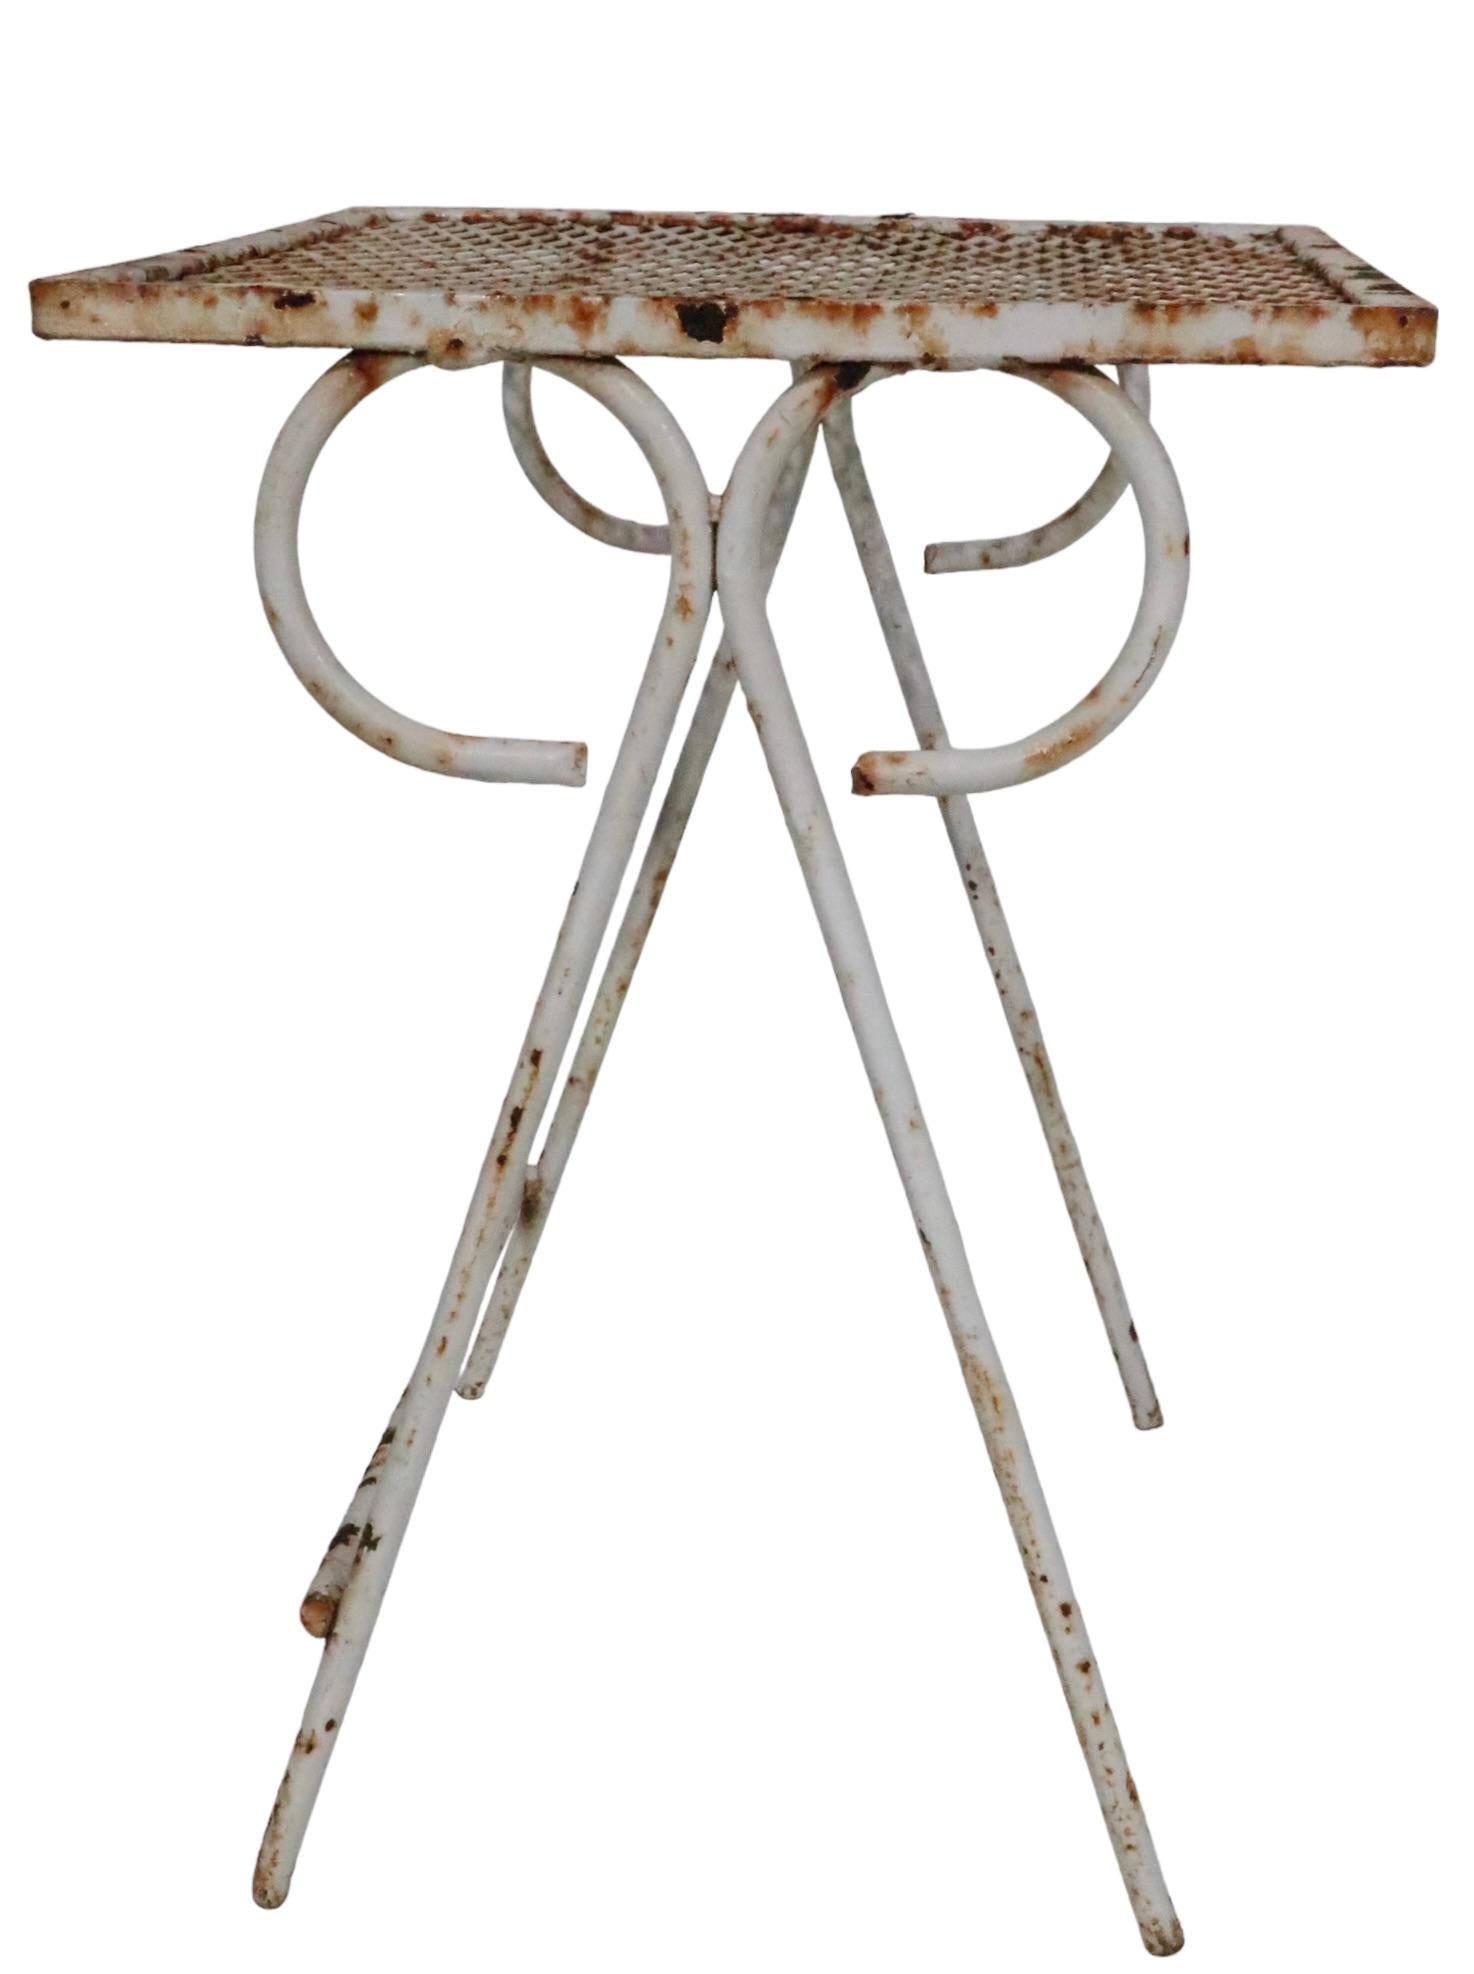 Set of Two Wrought Iron Nesting Tables by Tempestini for Salterini, circa 1950s For Sale 4